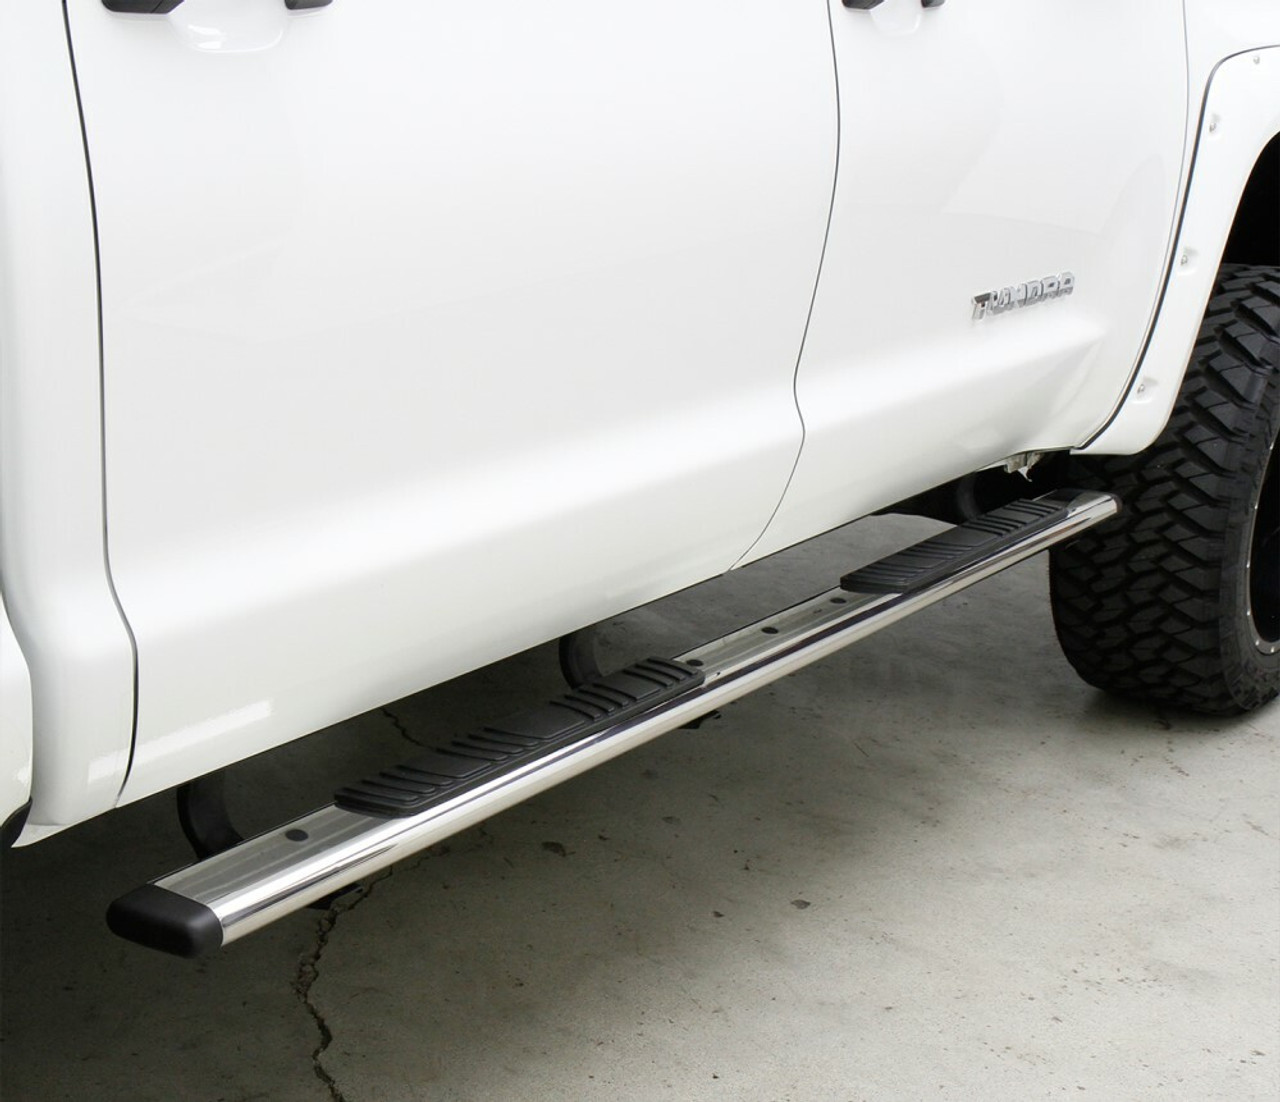 Go Rhino 685404787T Chevrolet, Silverado 2500HD, 3500HD, 2020 - 2021, 5 inch OE Xtreme Low Profile - Complete Kit: Galvanized Steel, Textured black, 650087T side bars + 6840475 OE Xtreme Brackets. 5 inch x 87 inch bars, New Body Style Only